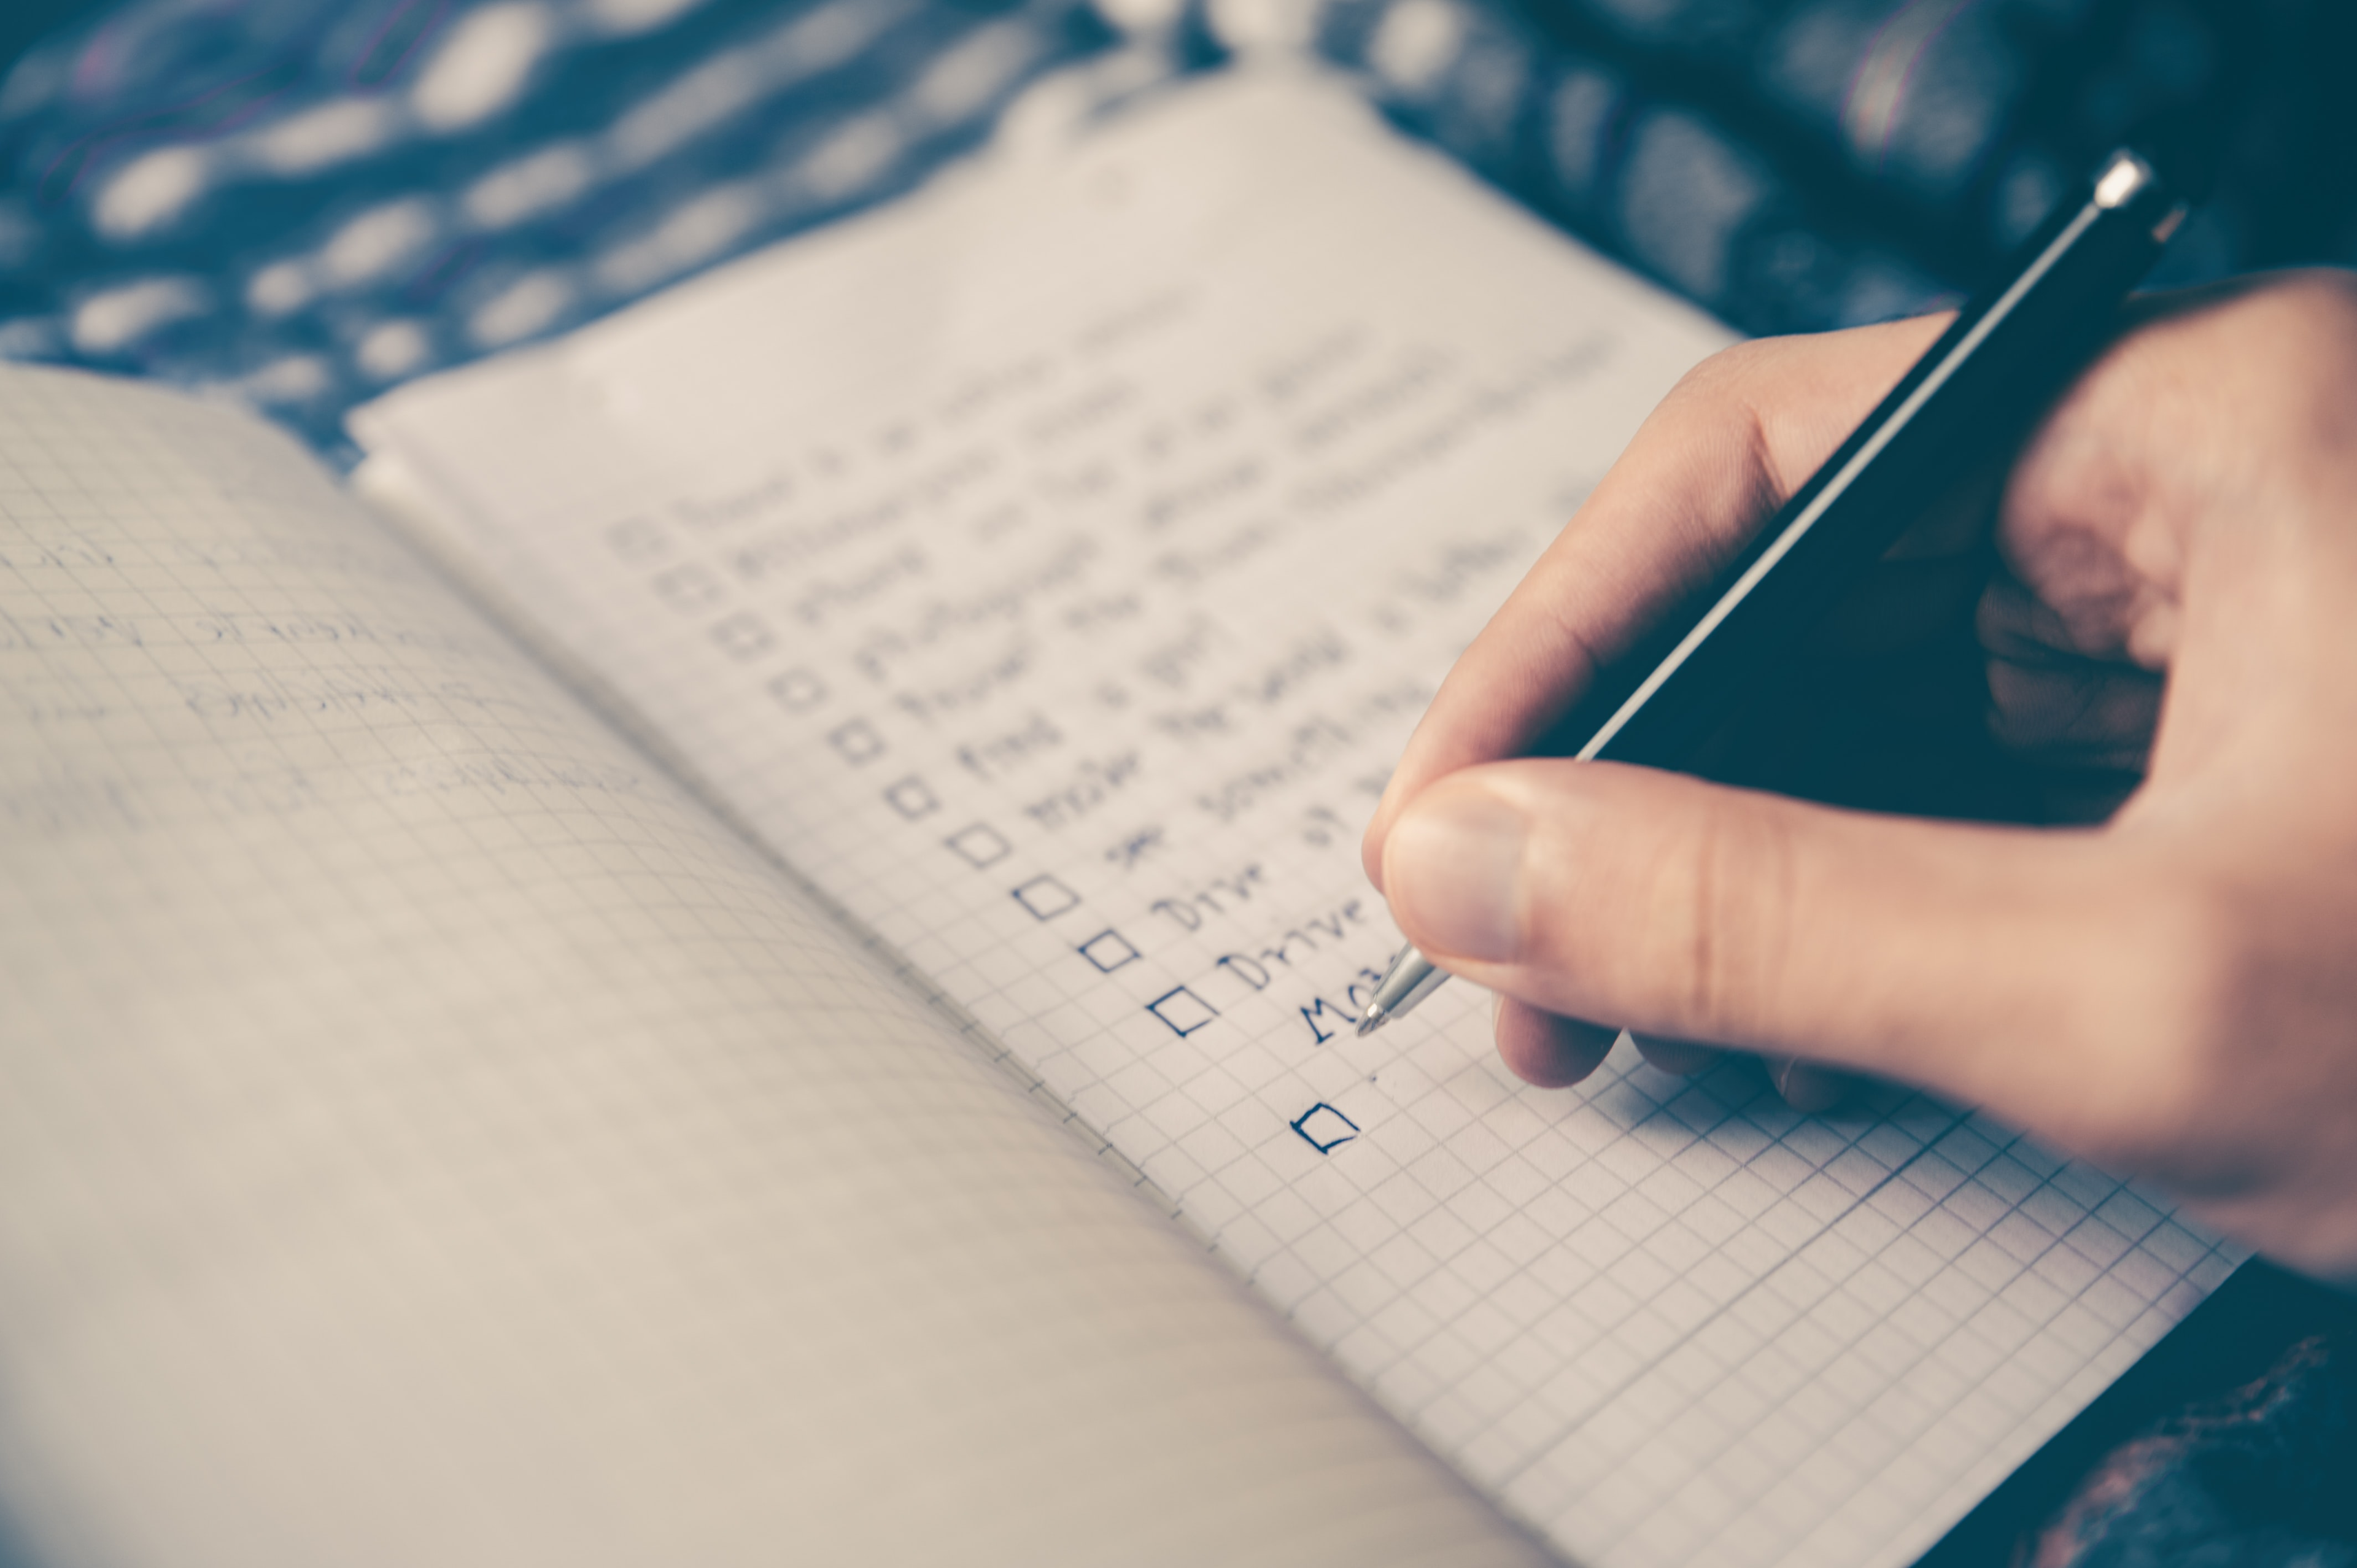 creating a checklist in a notebook